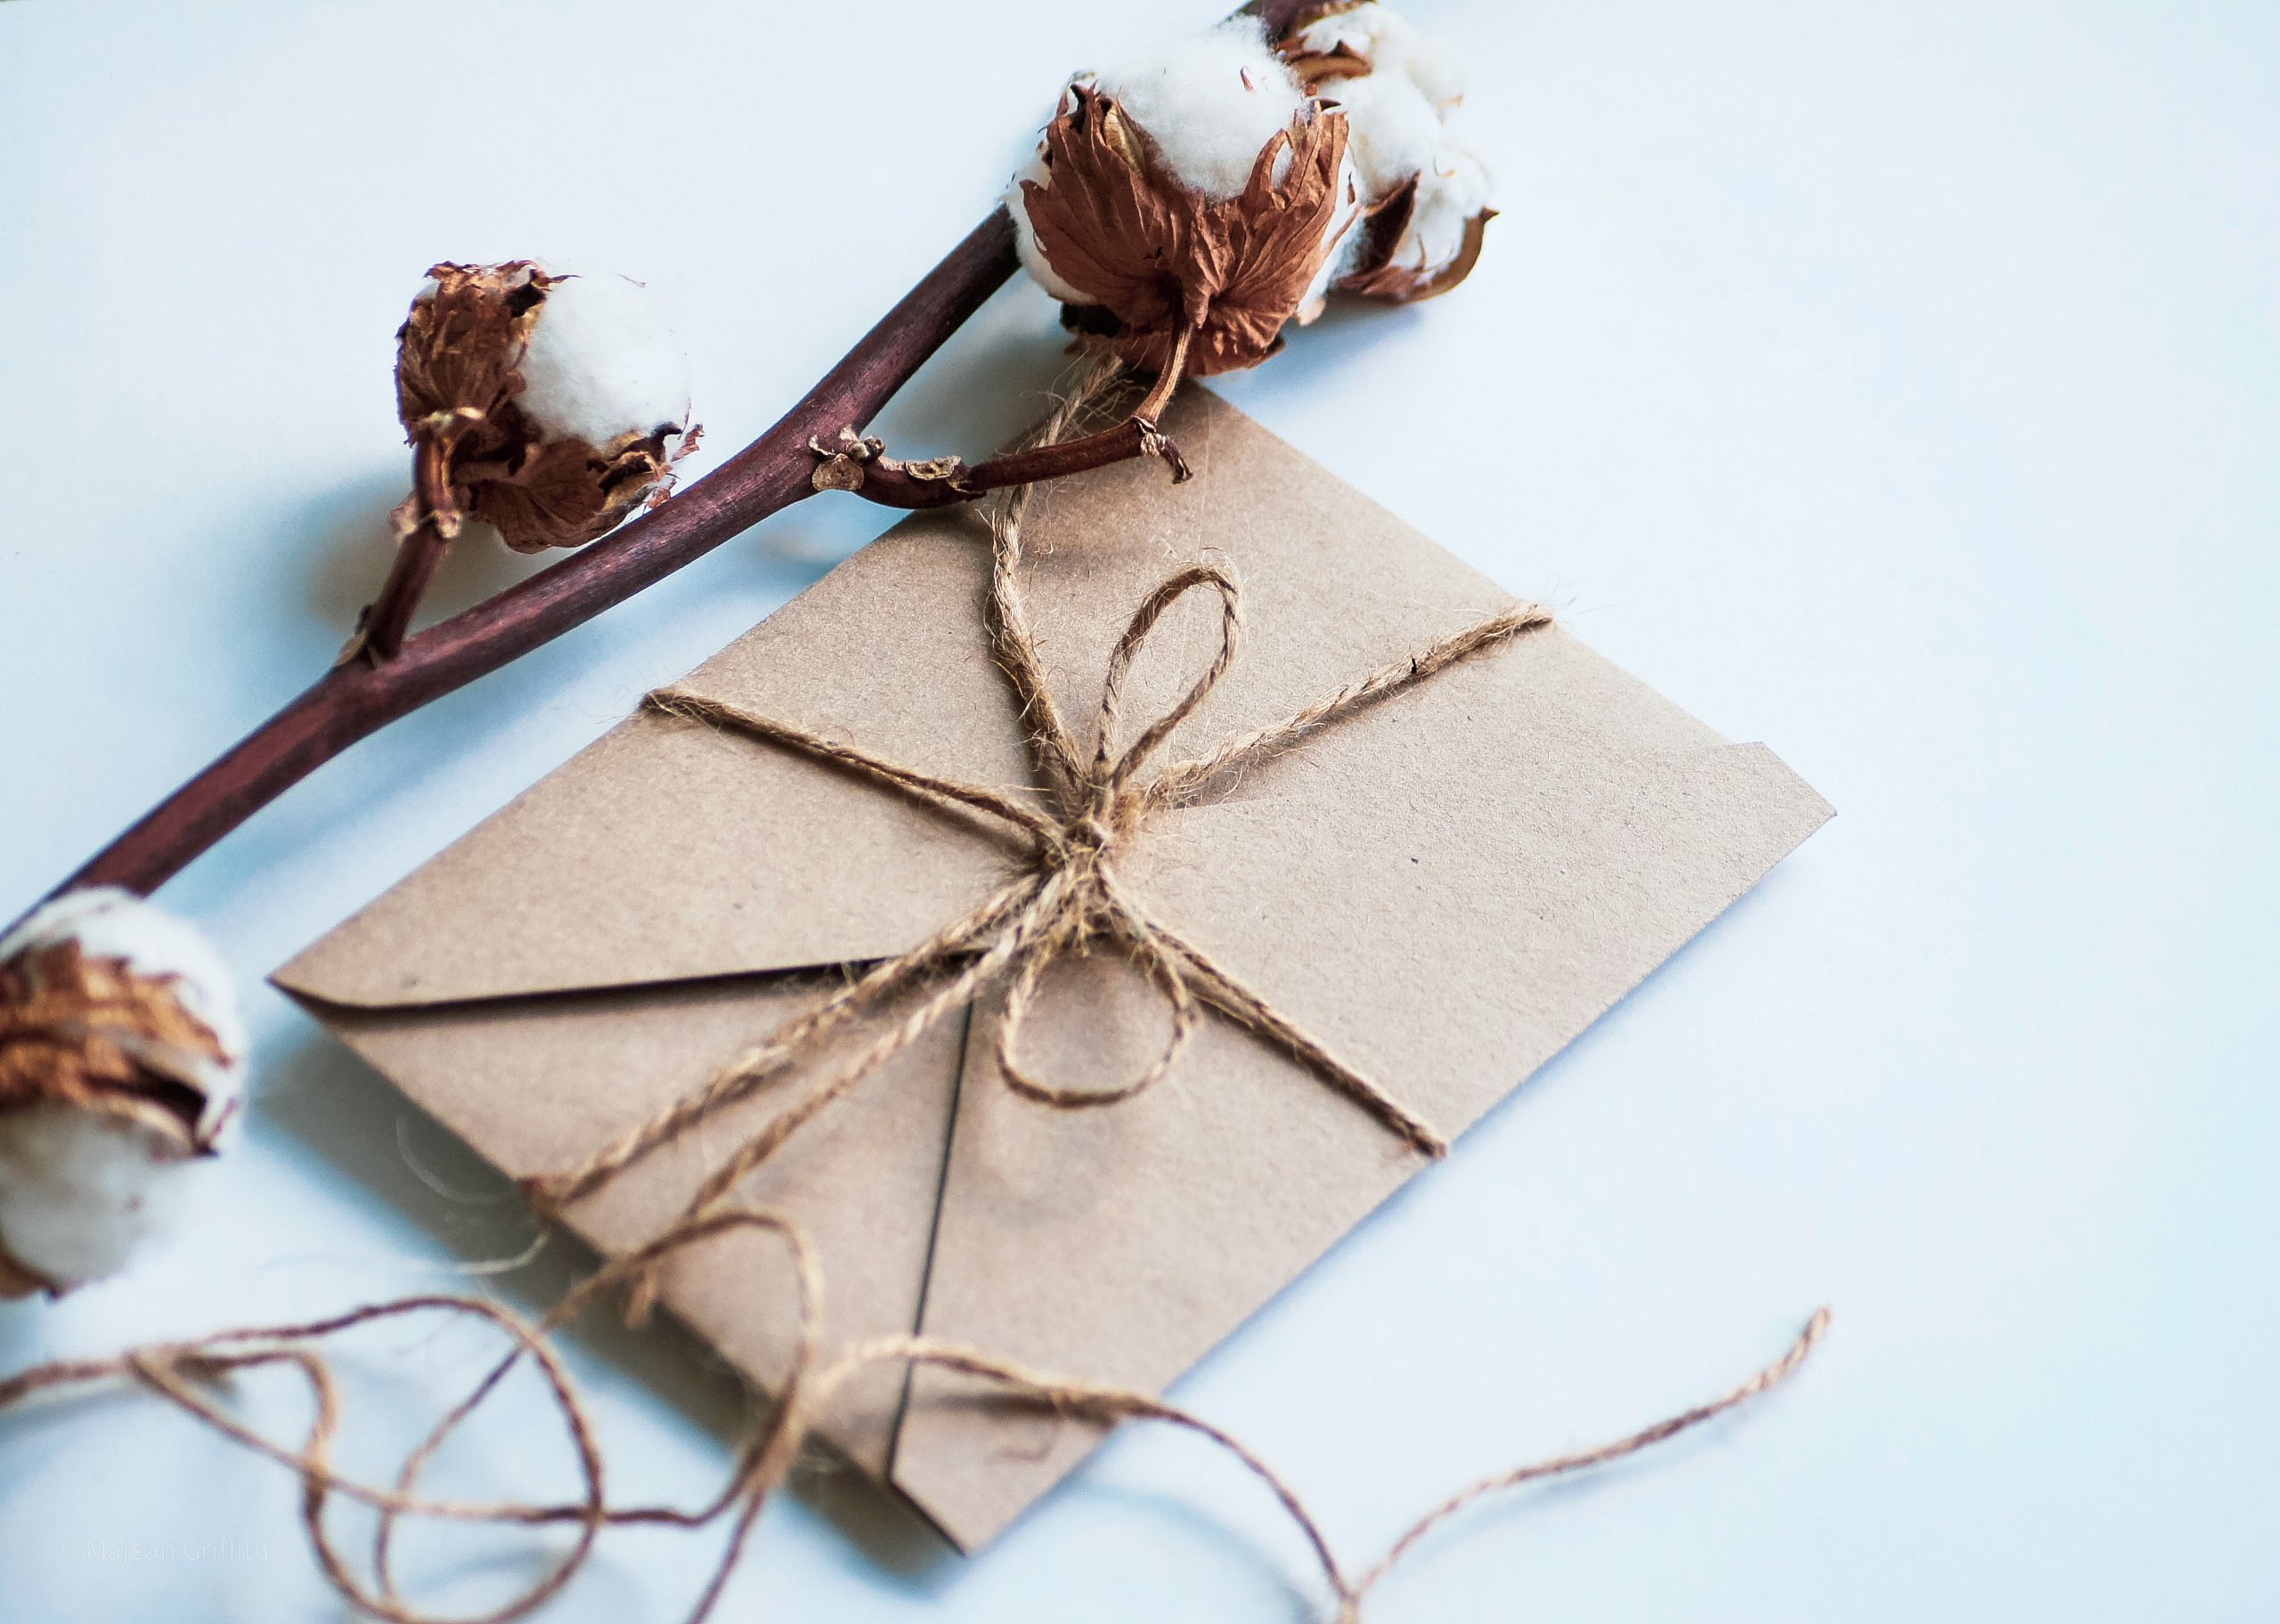 Ultimate Christmas 2020 gift guide - wrapped present with brown paper and twine